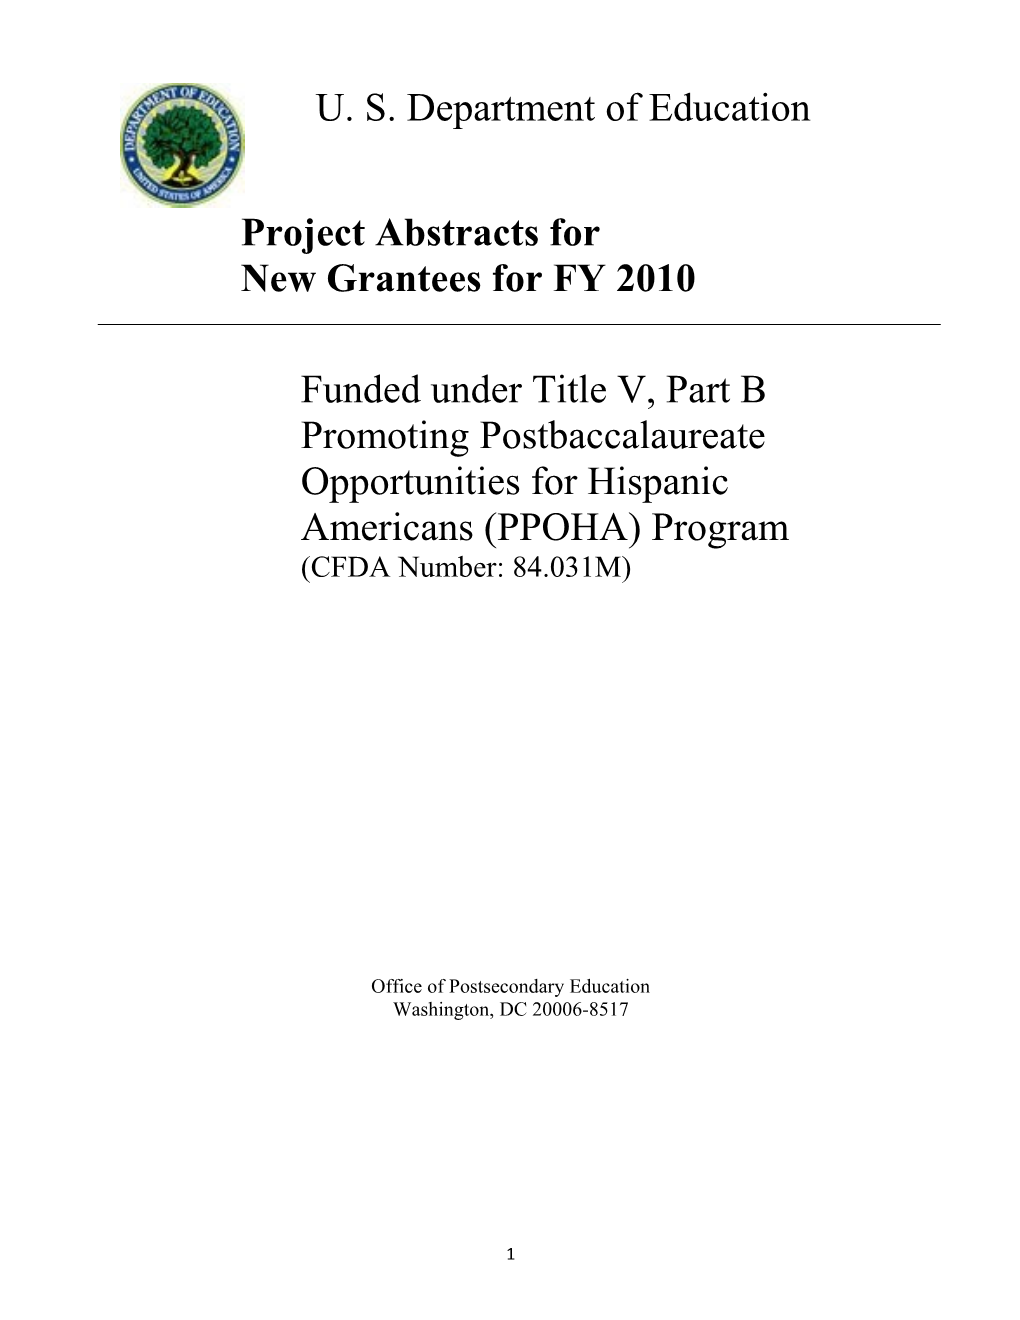 Promoting Postbaccalaureate Opportunities for Hispanic Americans Program - FY 2010 Project